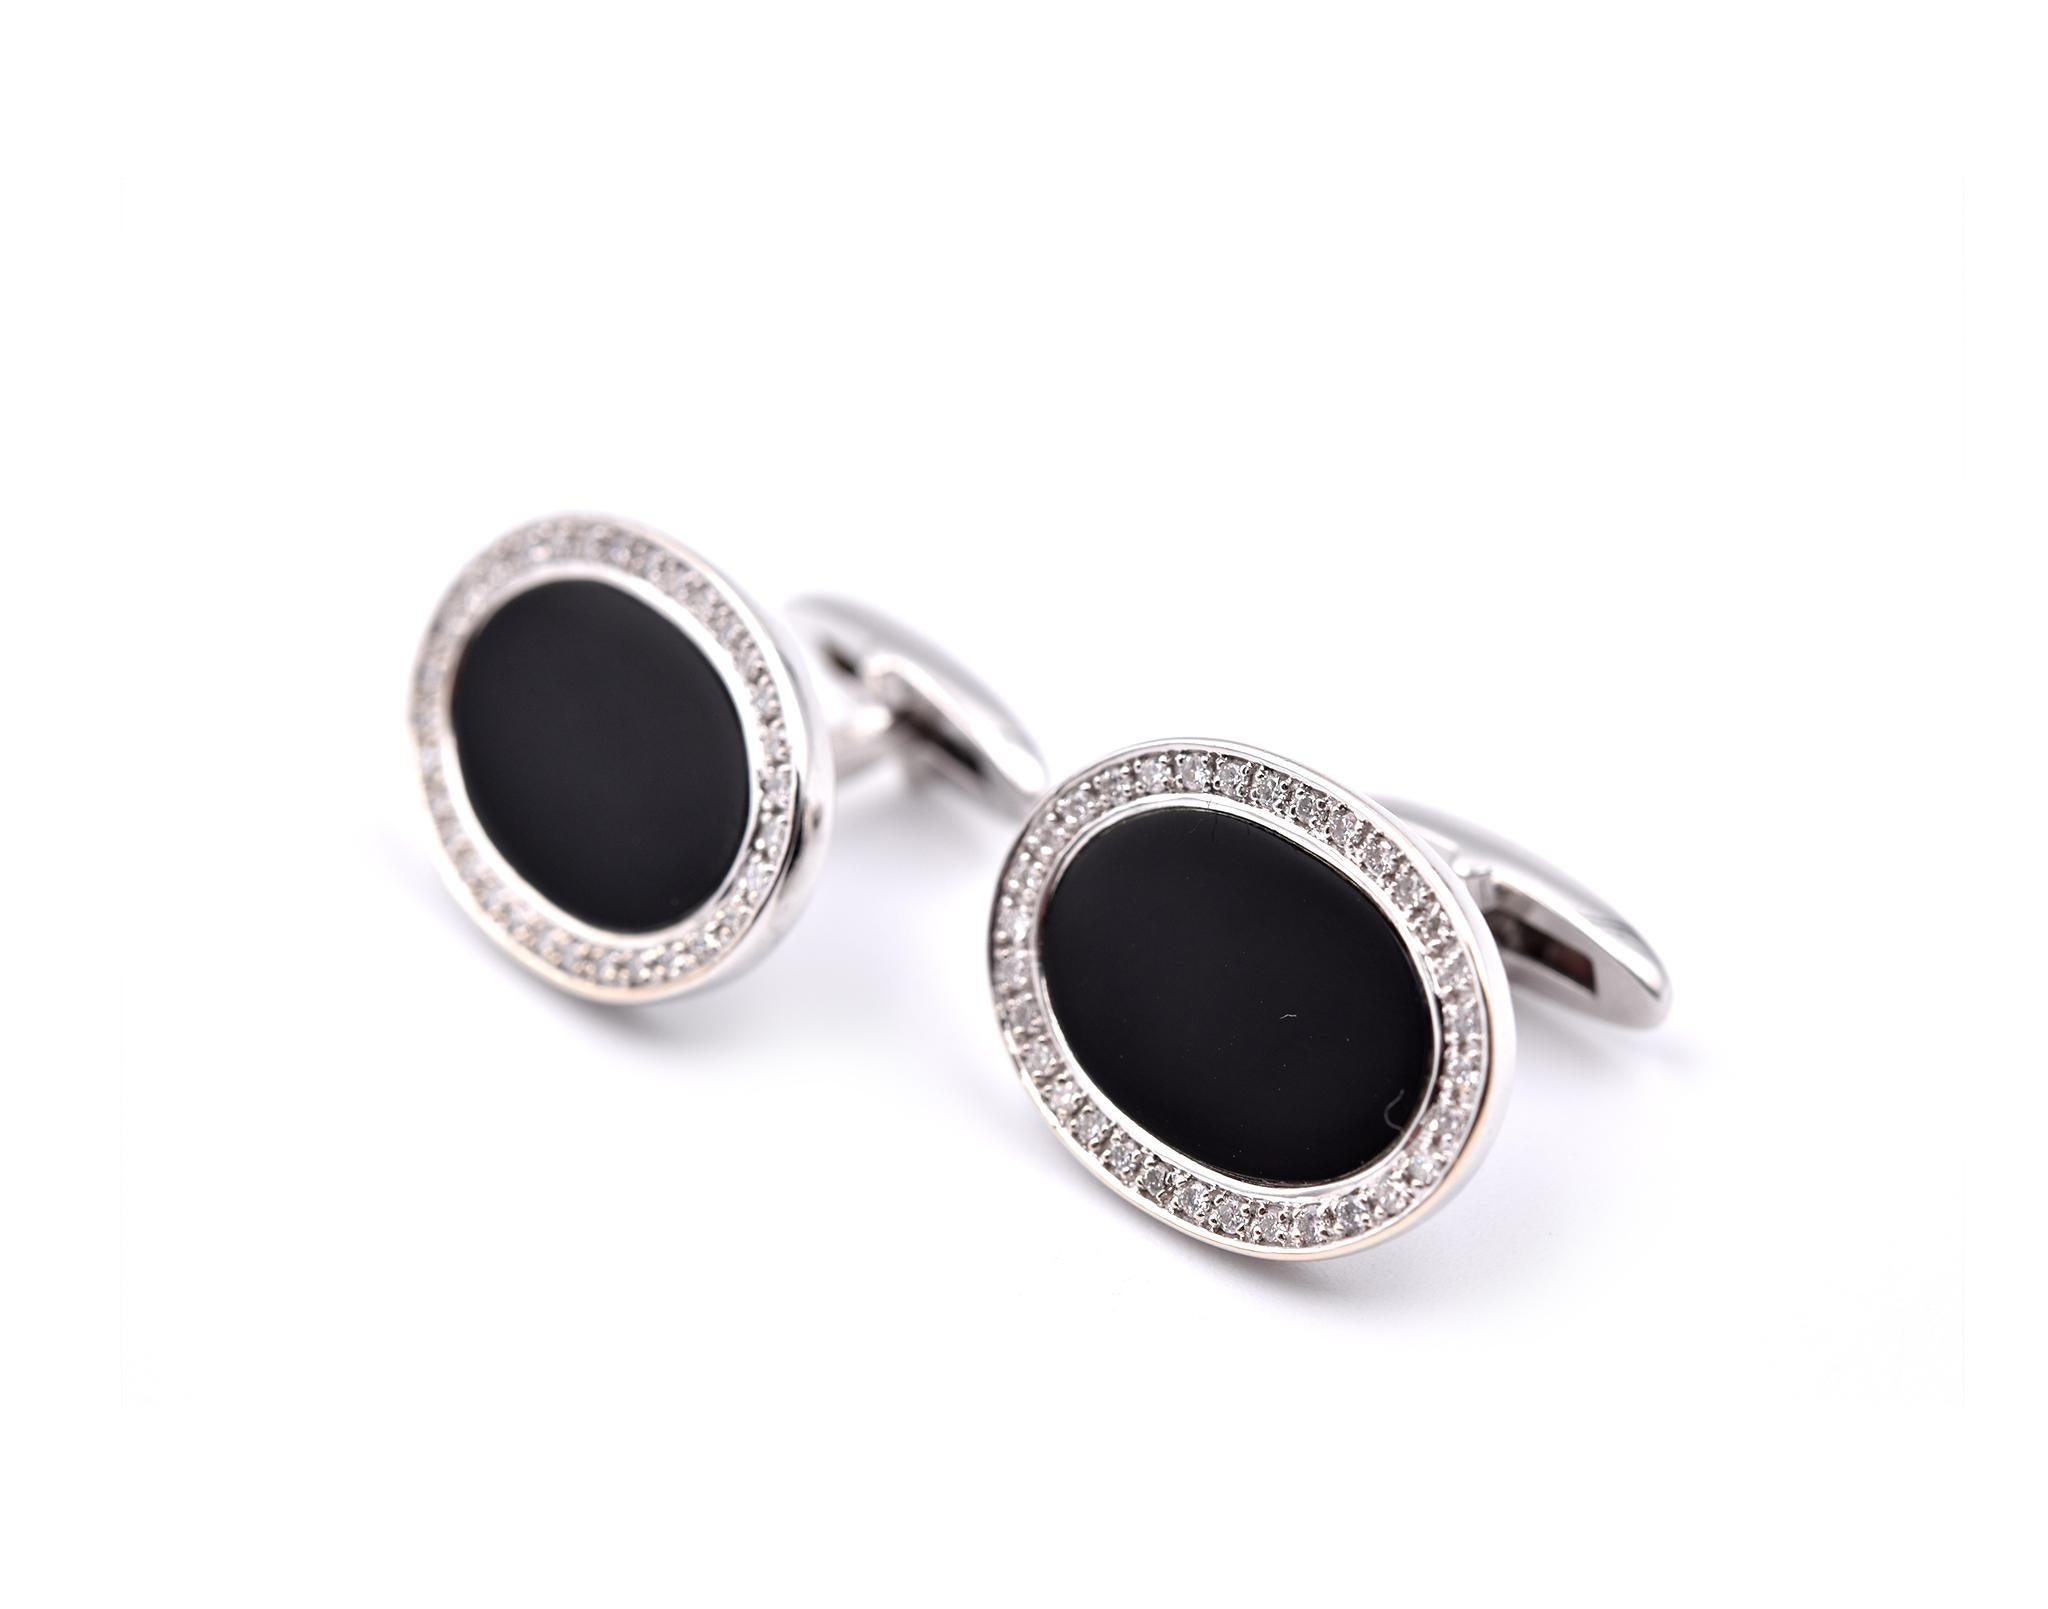 Designer: custom
Material: 18k white gold & Onyx
Diamonds: 66 round cuts= 0.40cttw
Color: G
Clarity: VS
Dimensions: each cufflink measures 19.37mm by 14.50mm
Weight: 8.17 grams
